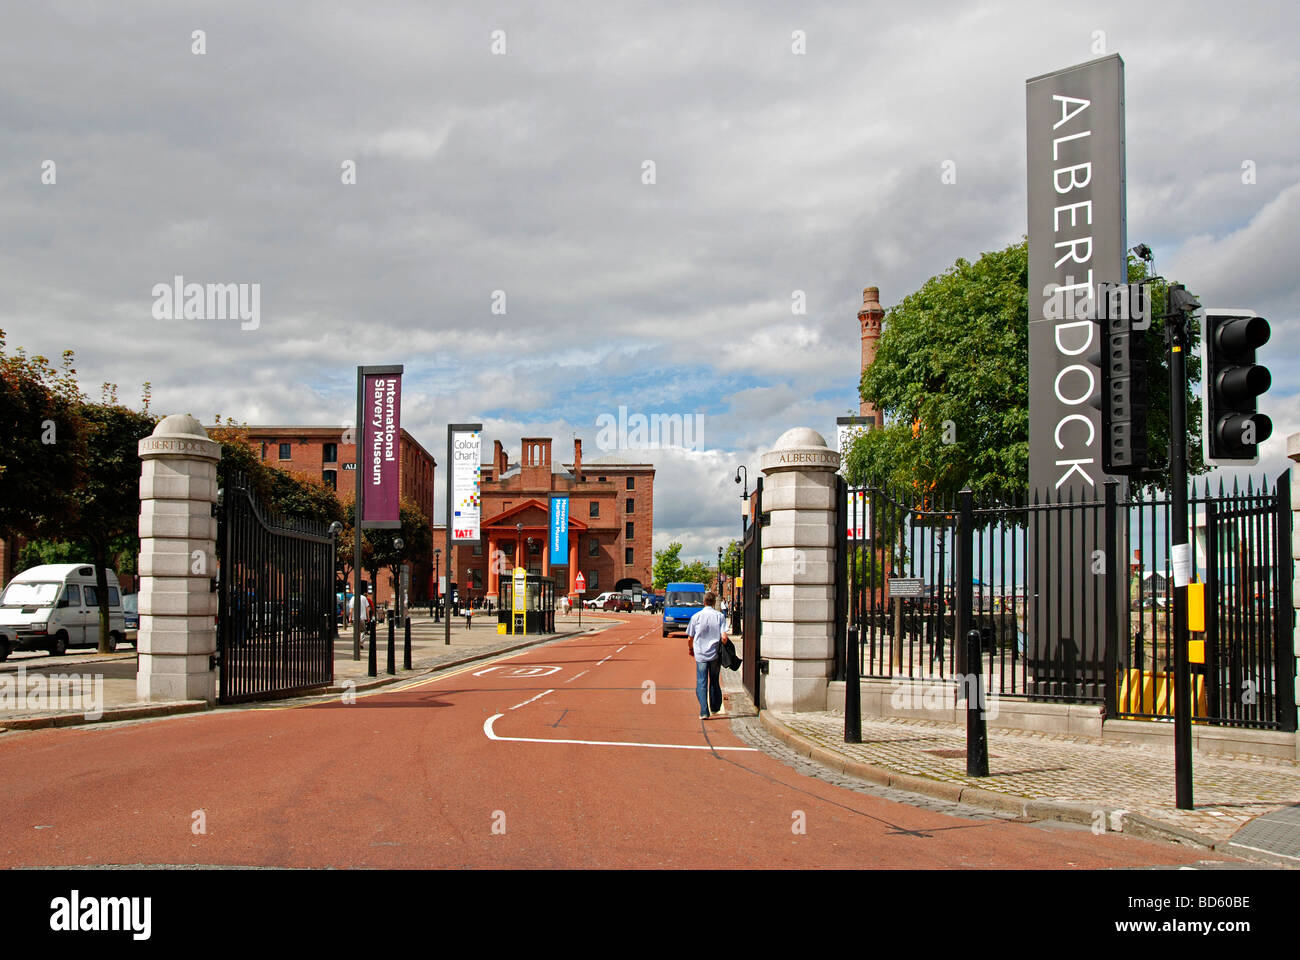 the entrance gates to 'albert dock' in liverpool,england,uk Stock Photo